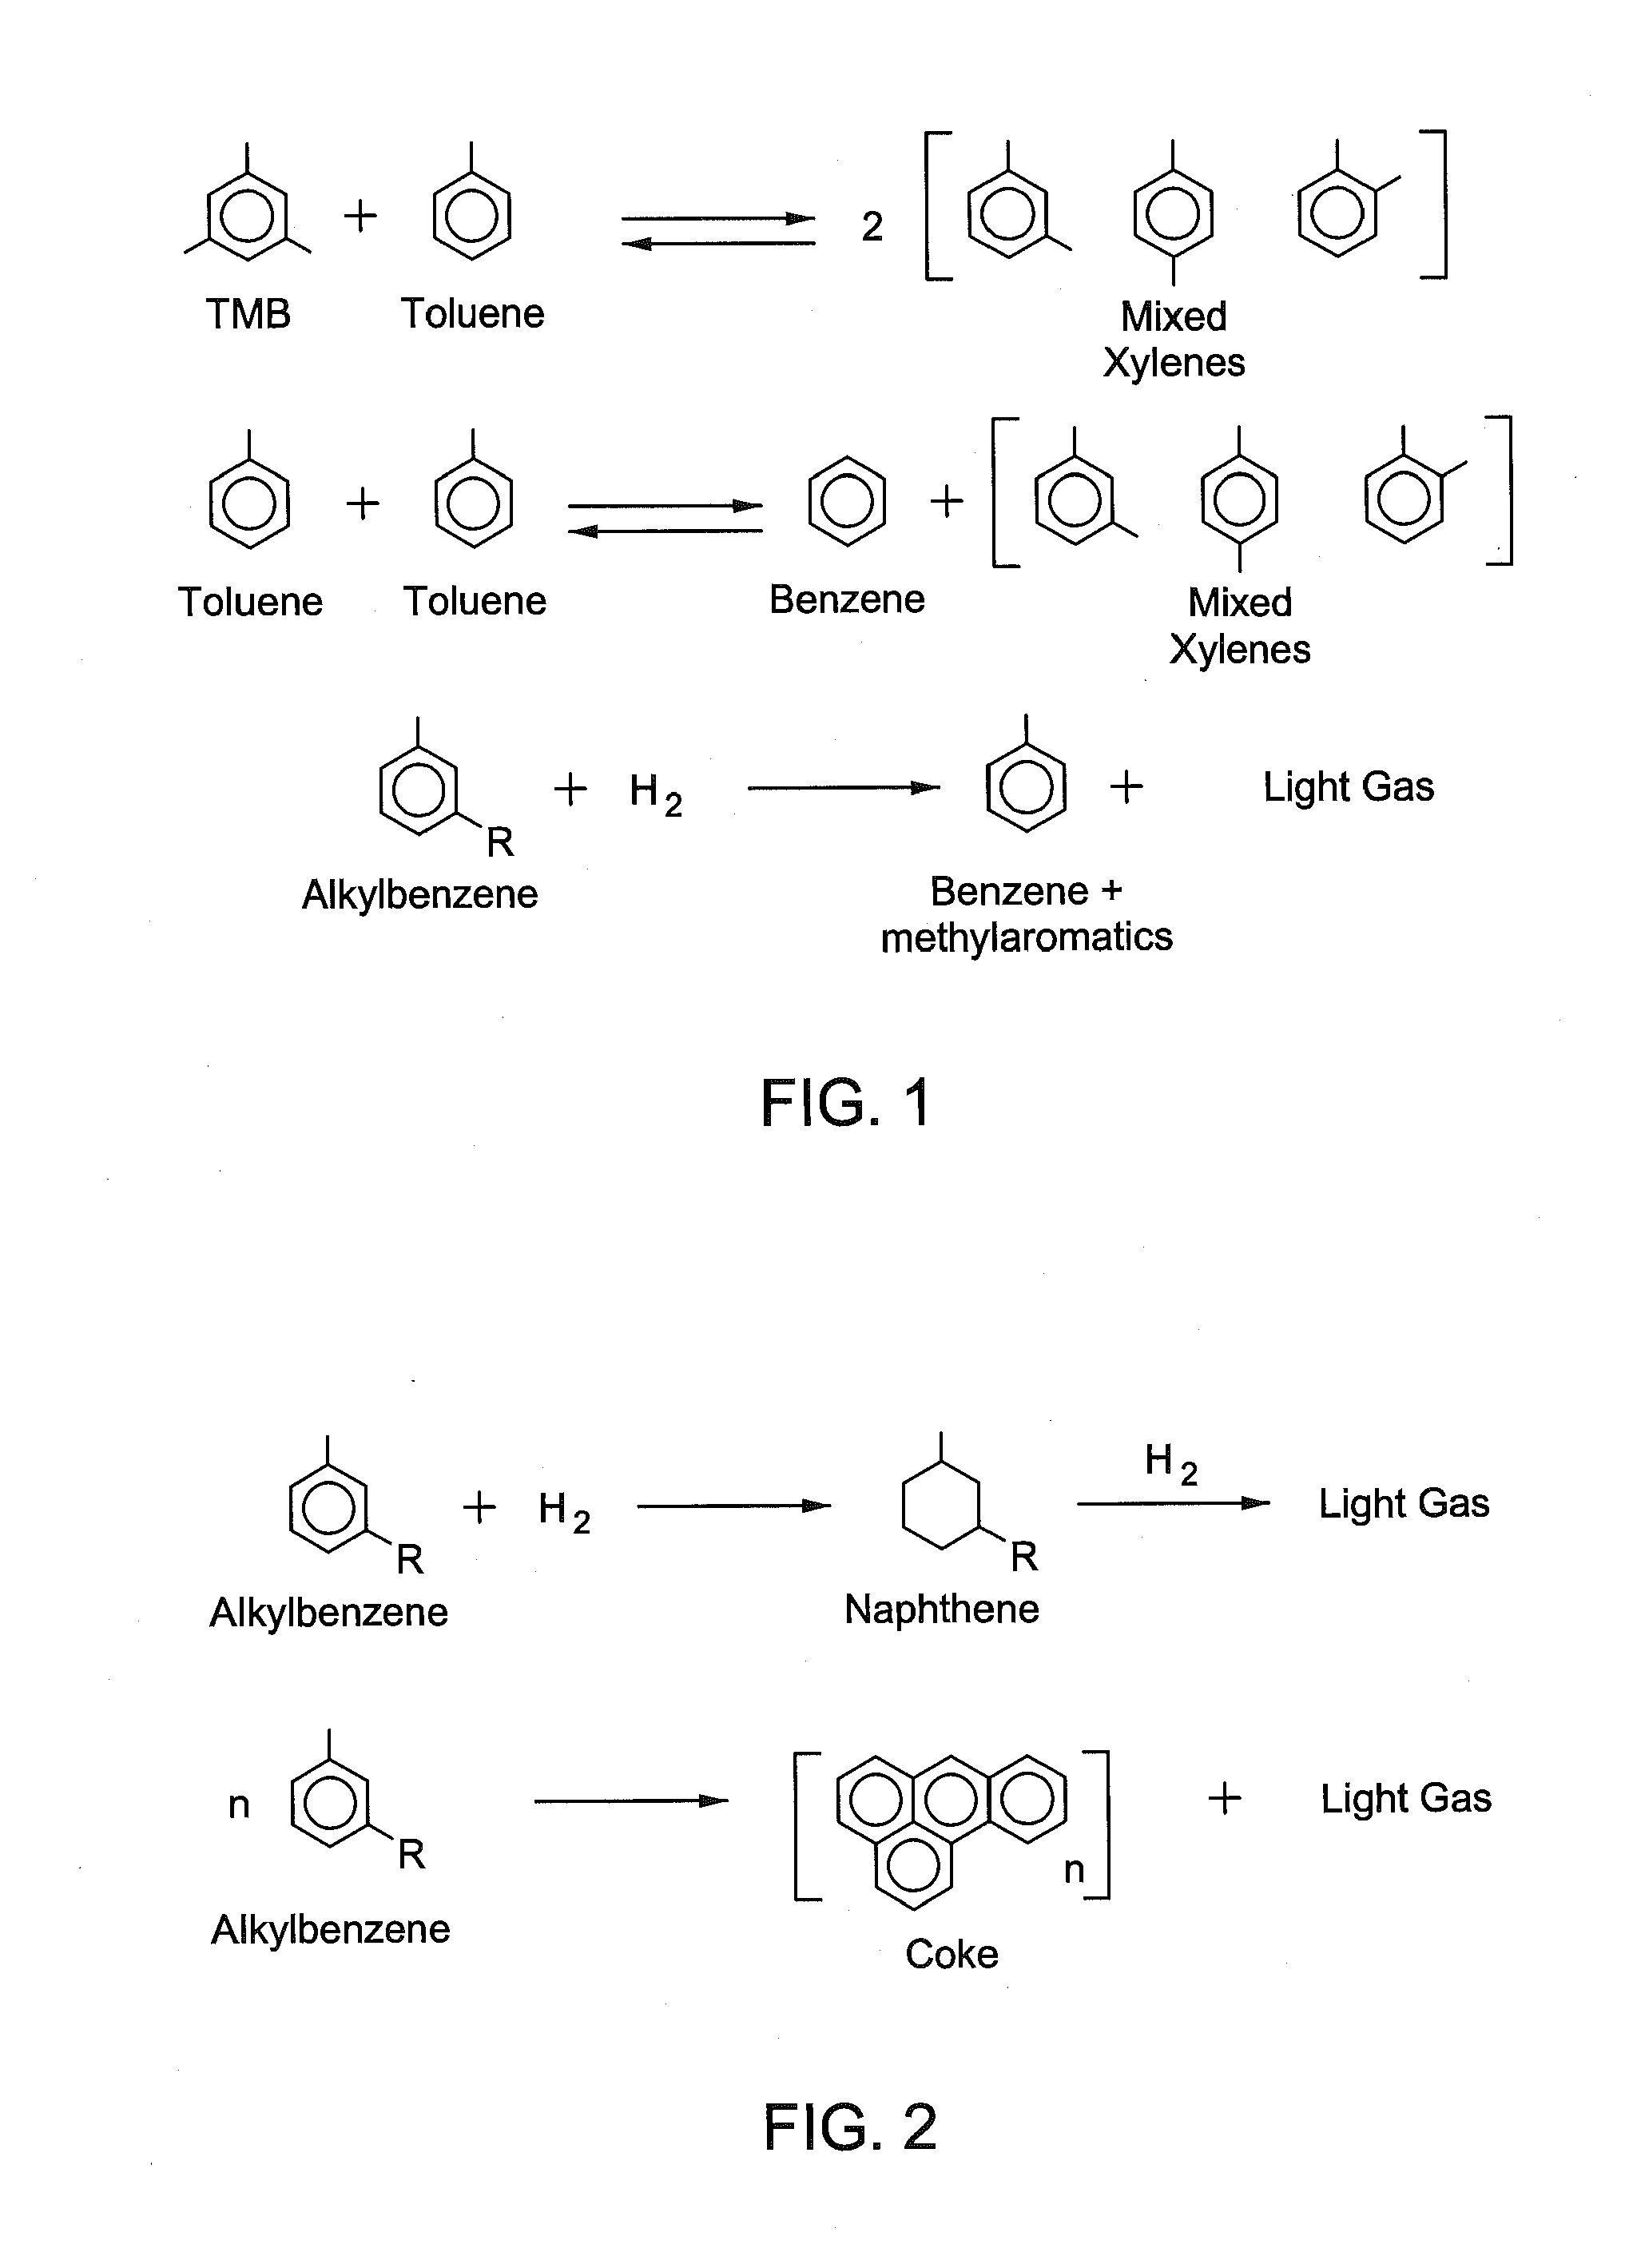 Process for the Production of Xylenes and Light Olefins from Heavy Aromatics